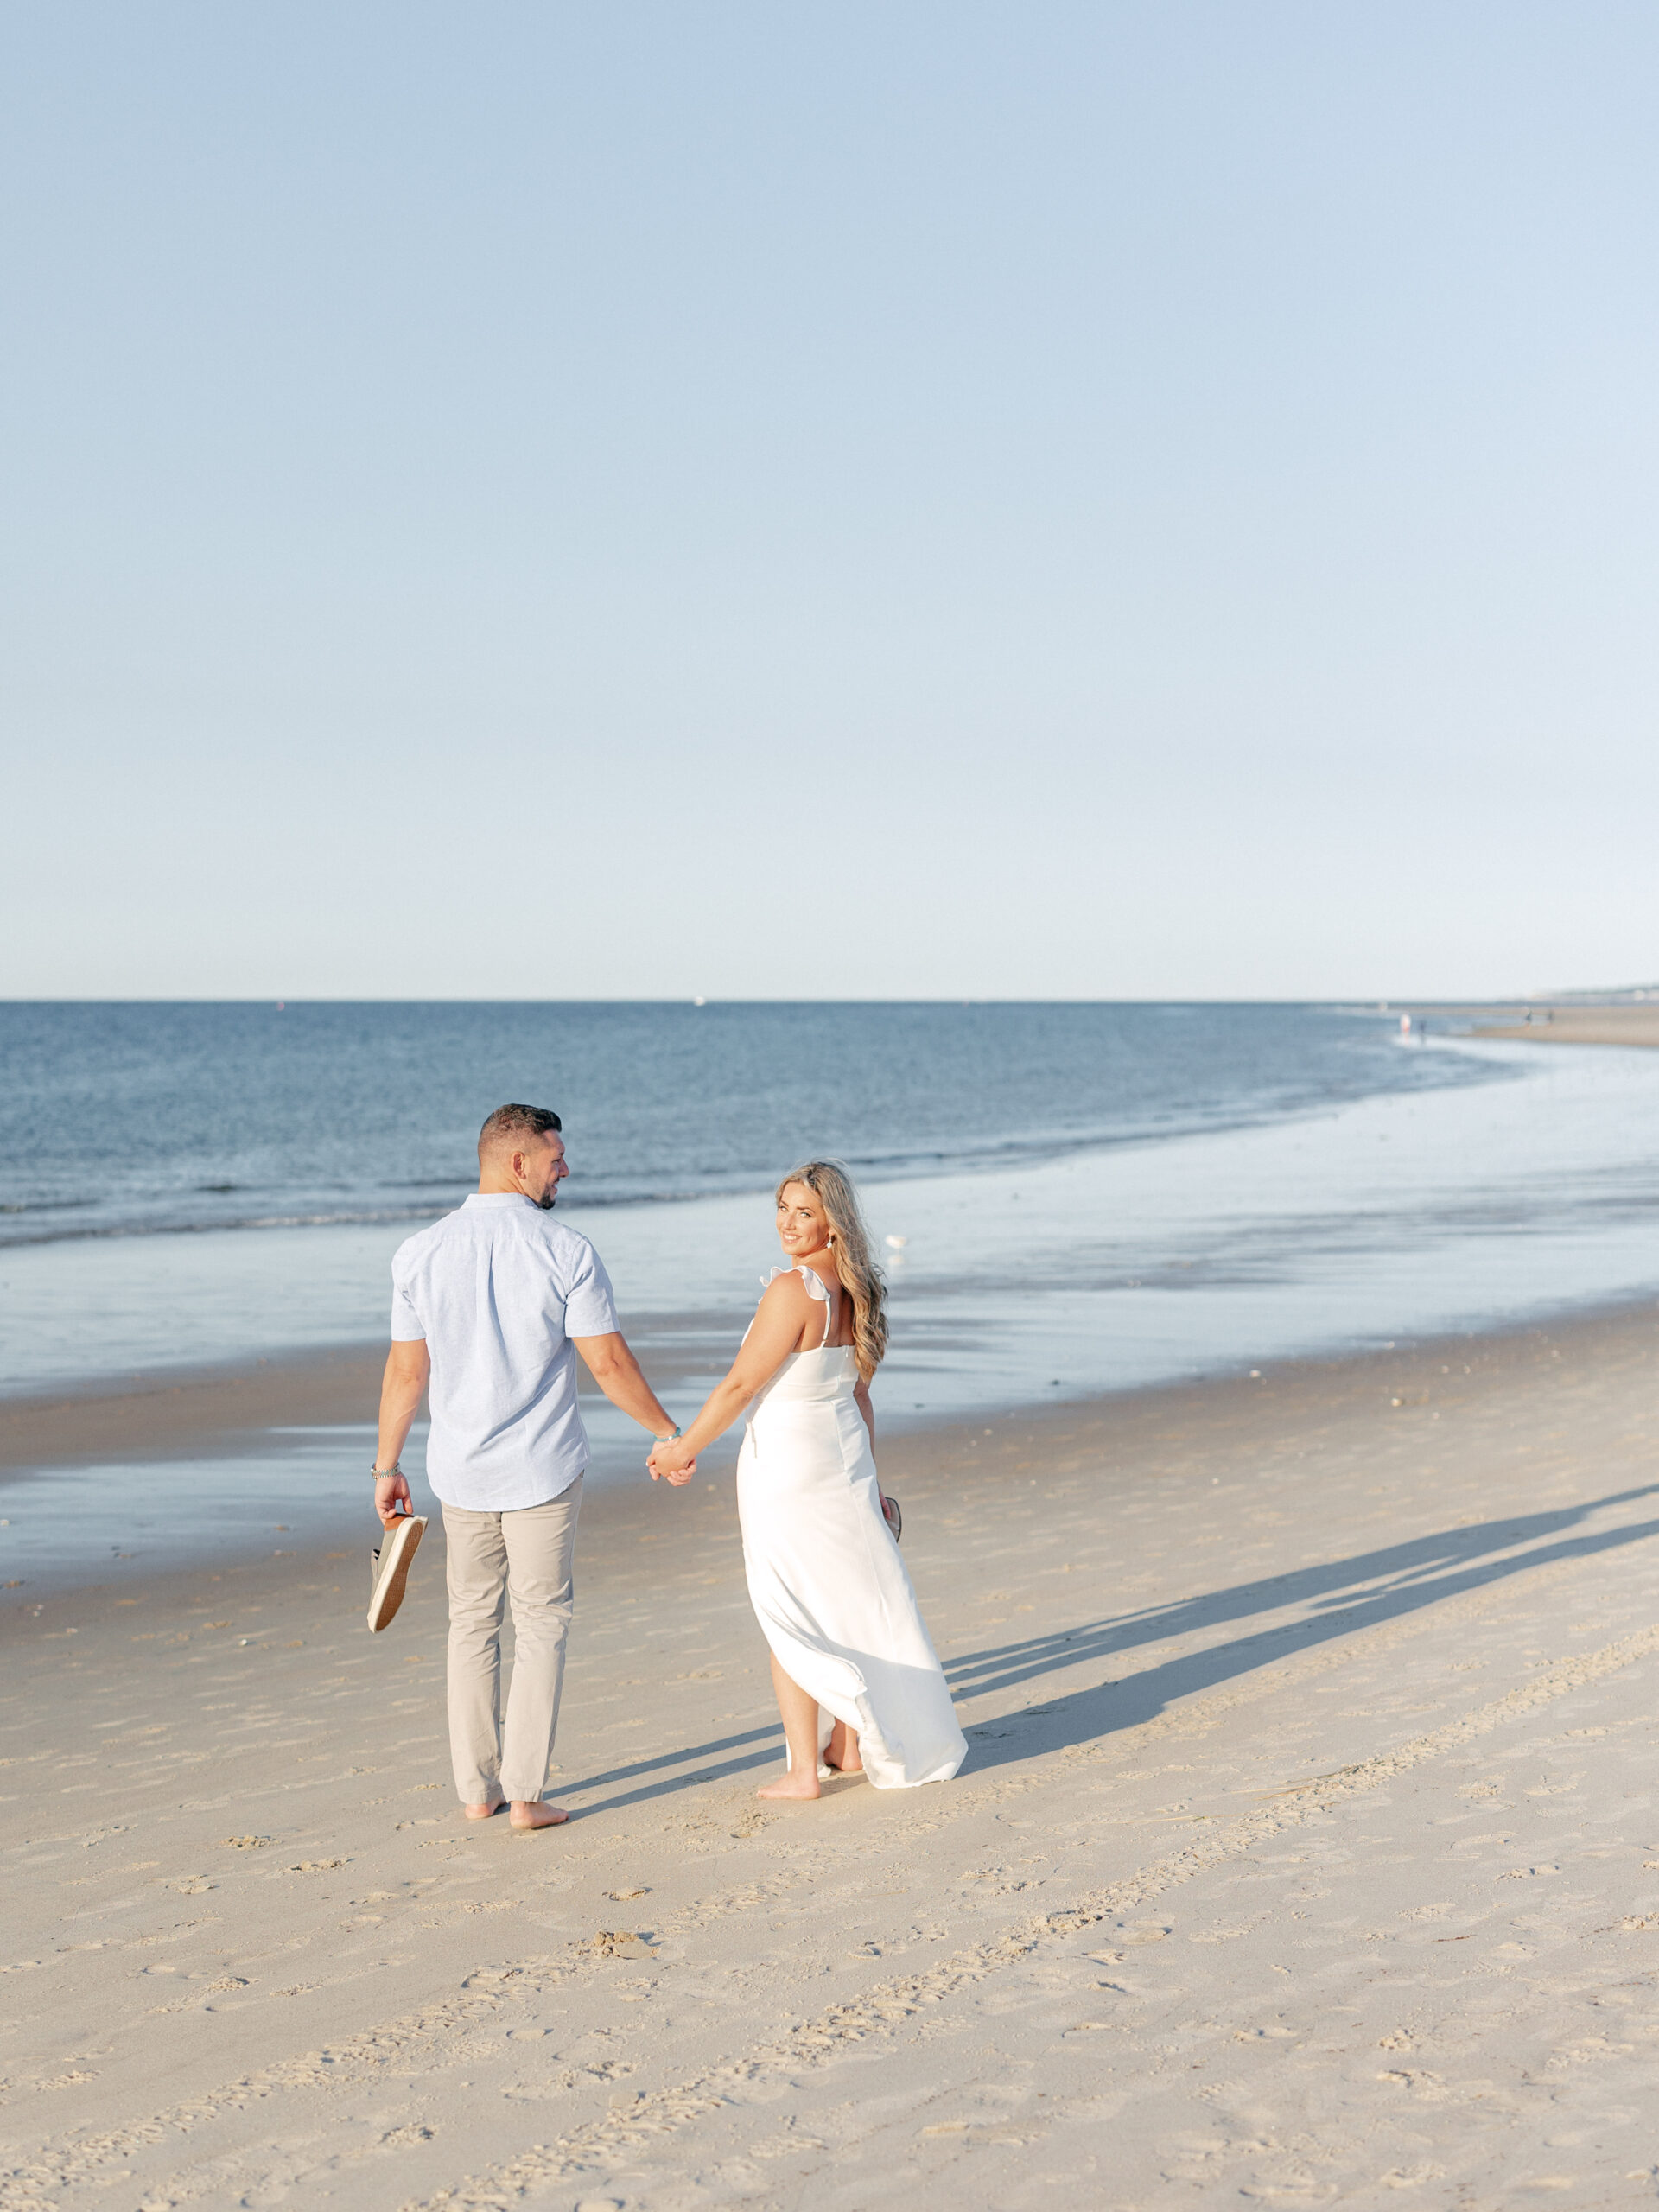 Guy and girl hold hands while walking with shoes in hand down the beach and the girl is looking back at the camera while the guy looks at the girl